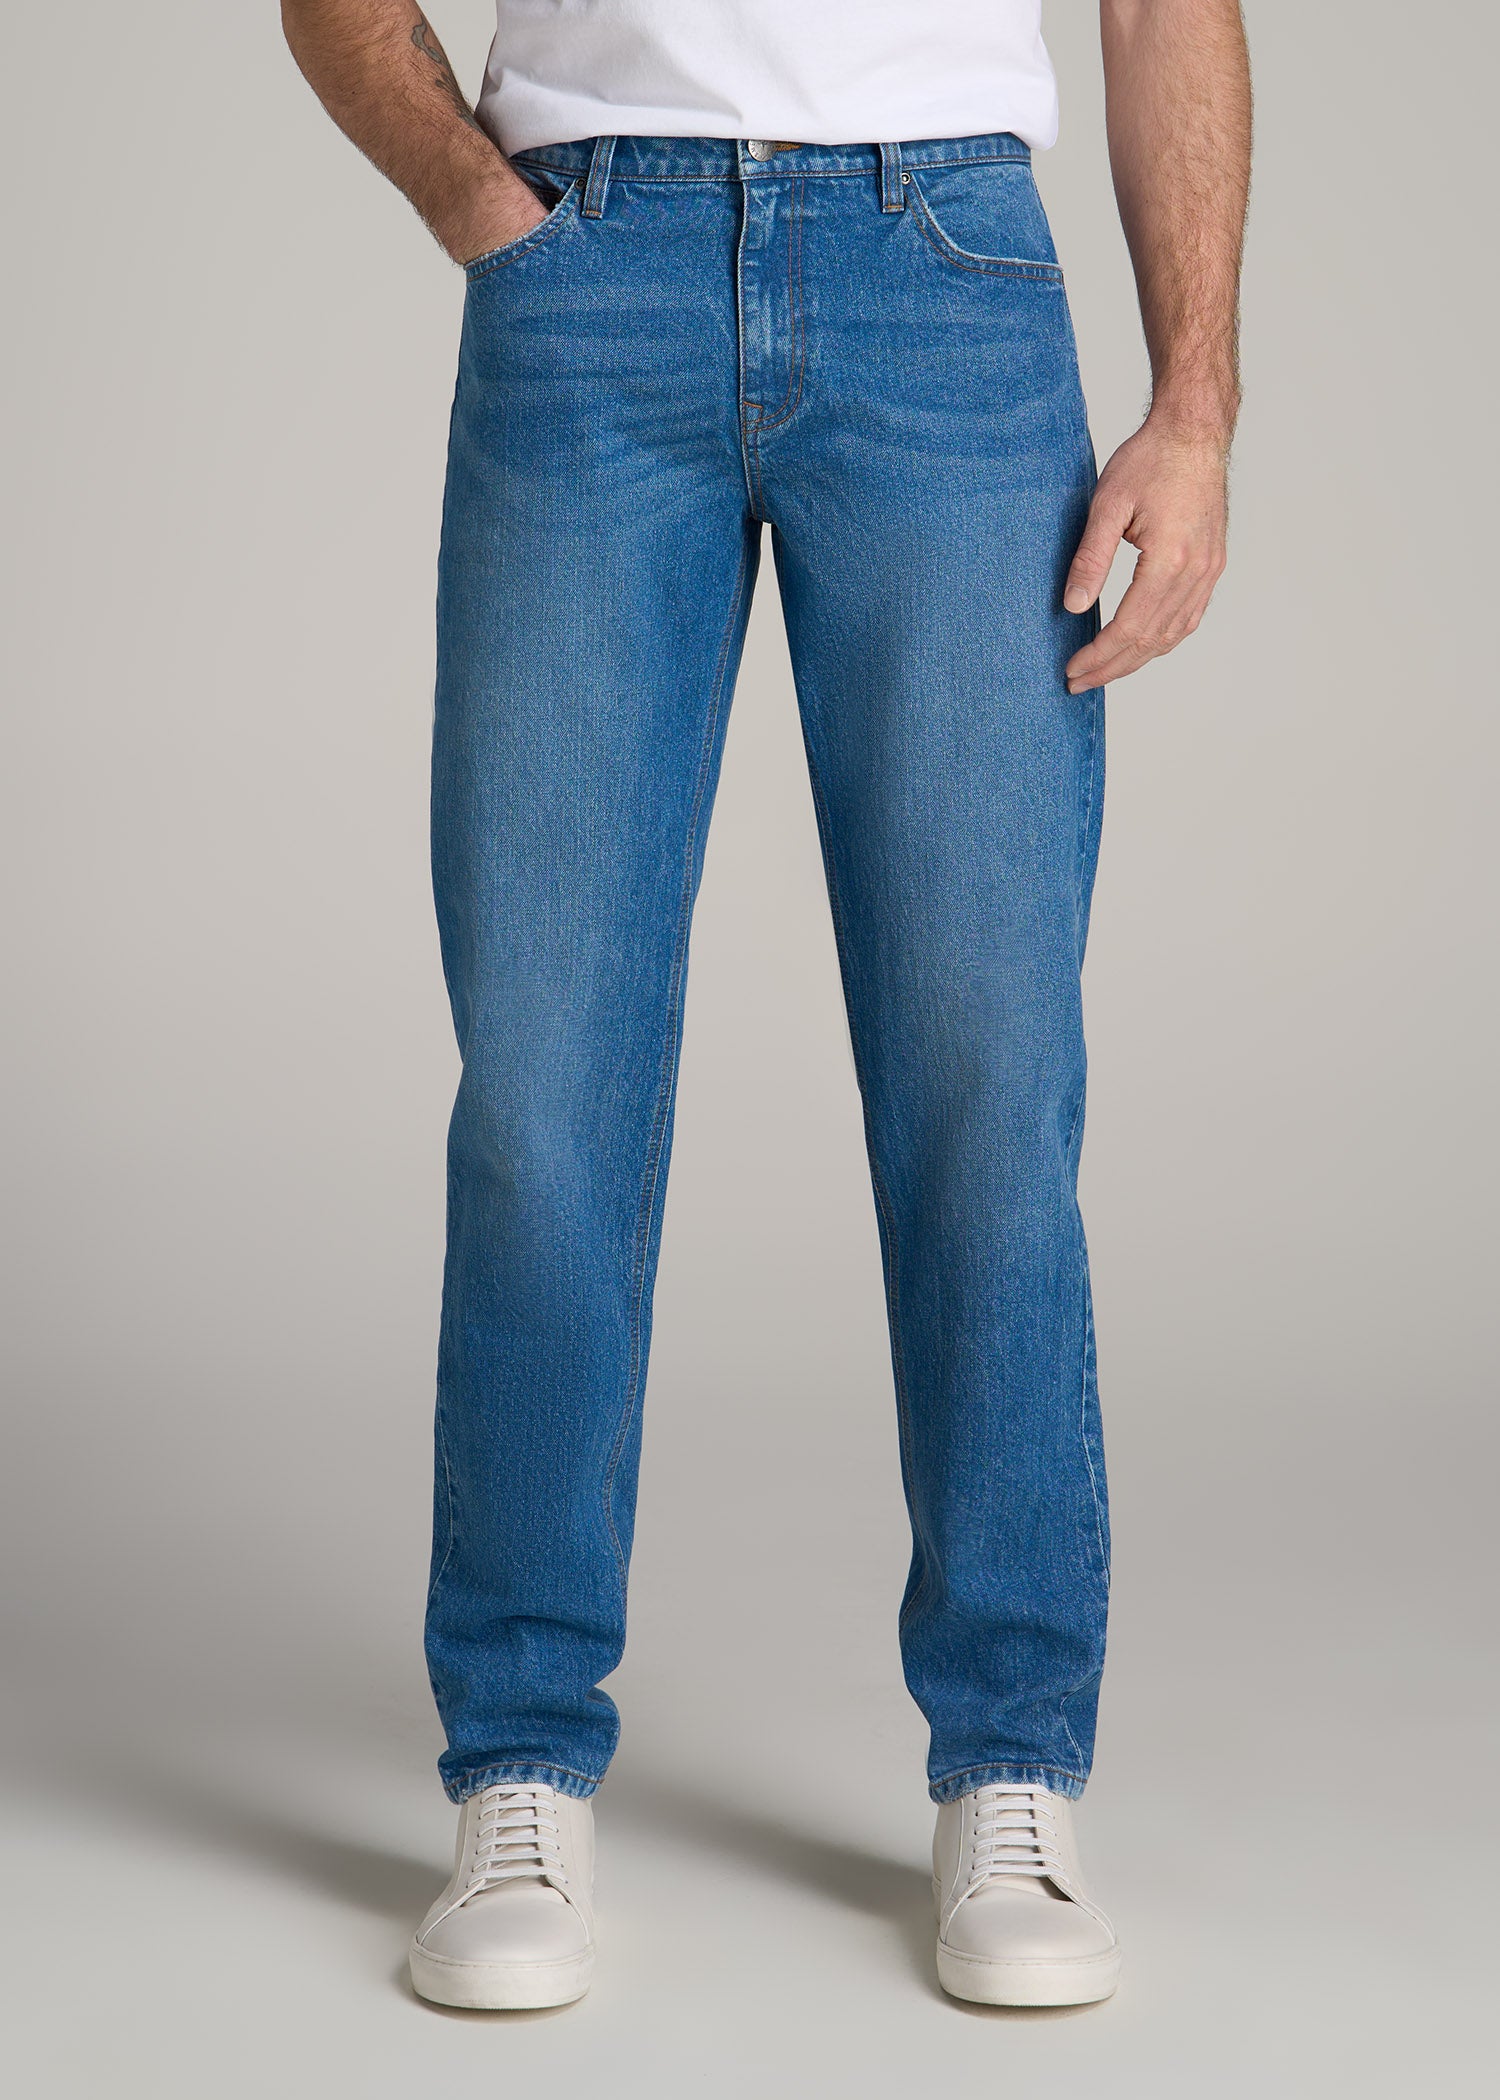 Milo Relaxed Tapered Fit Jeans for Tall Men | American Tall